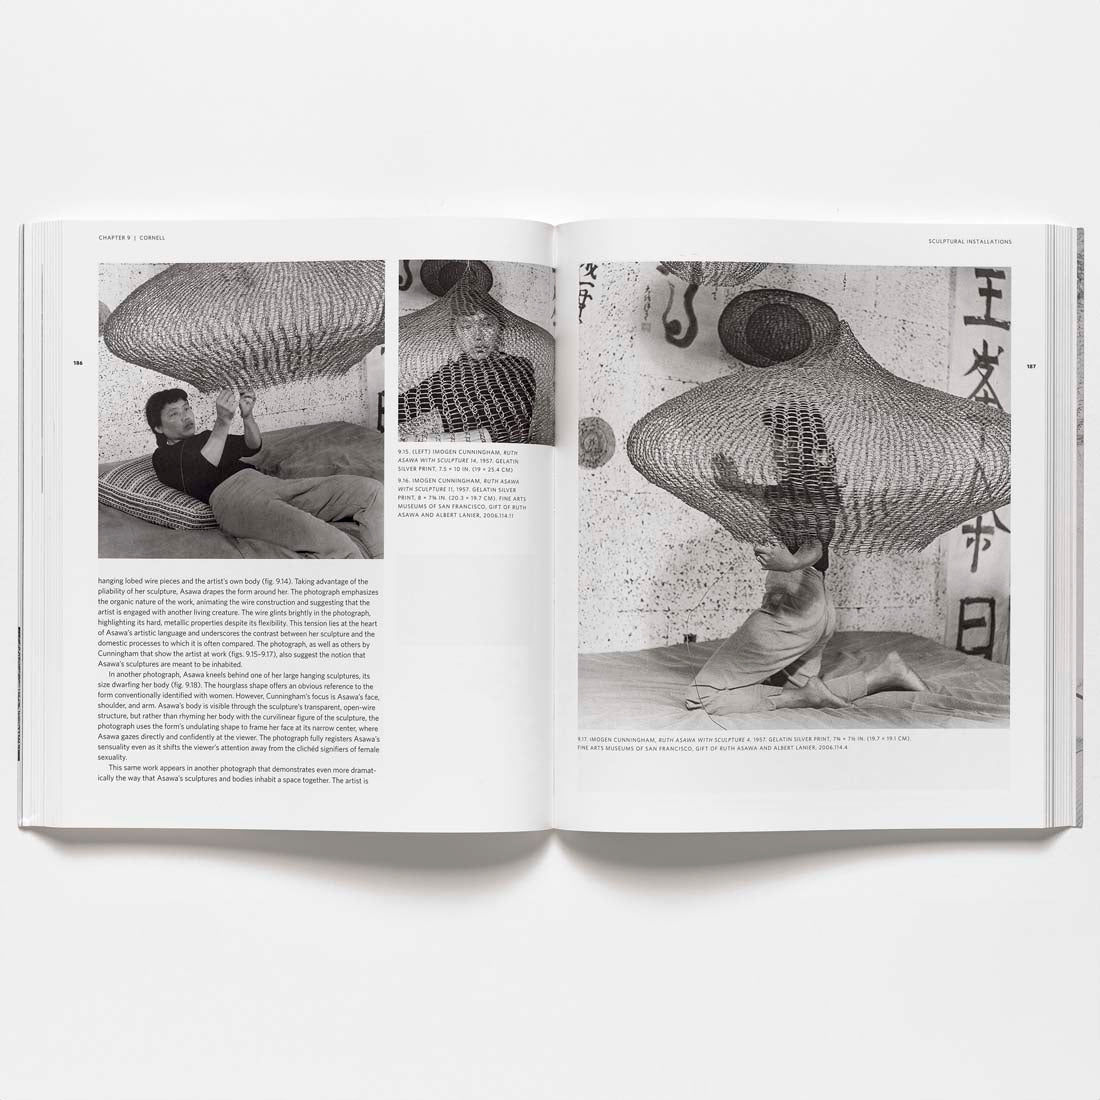 The Sculptures of Ruth Asawa: Contours in the Air Revised Edition